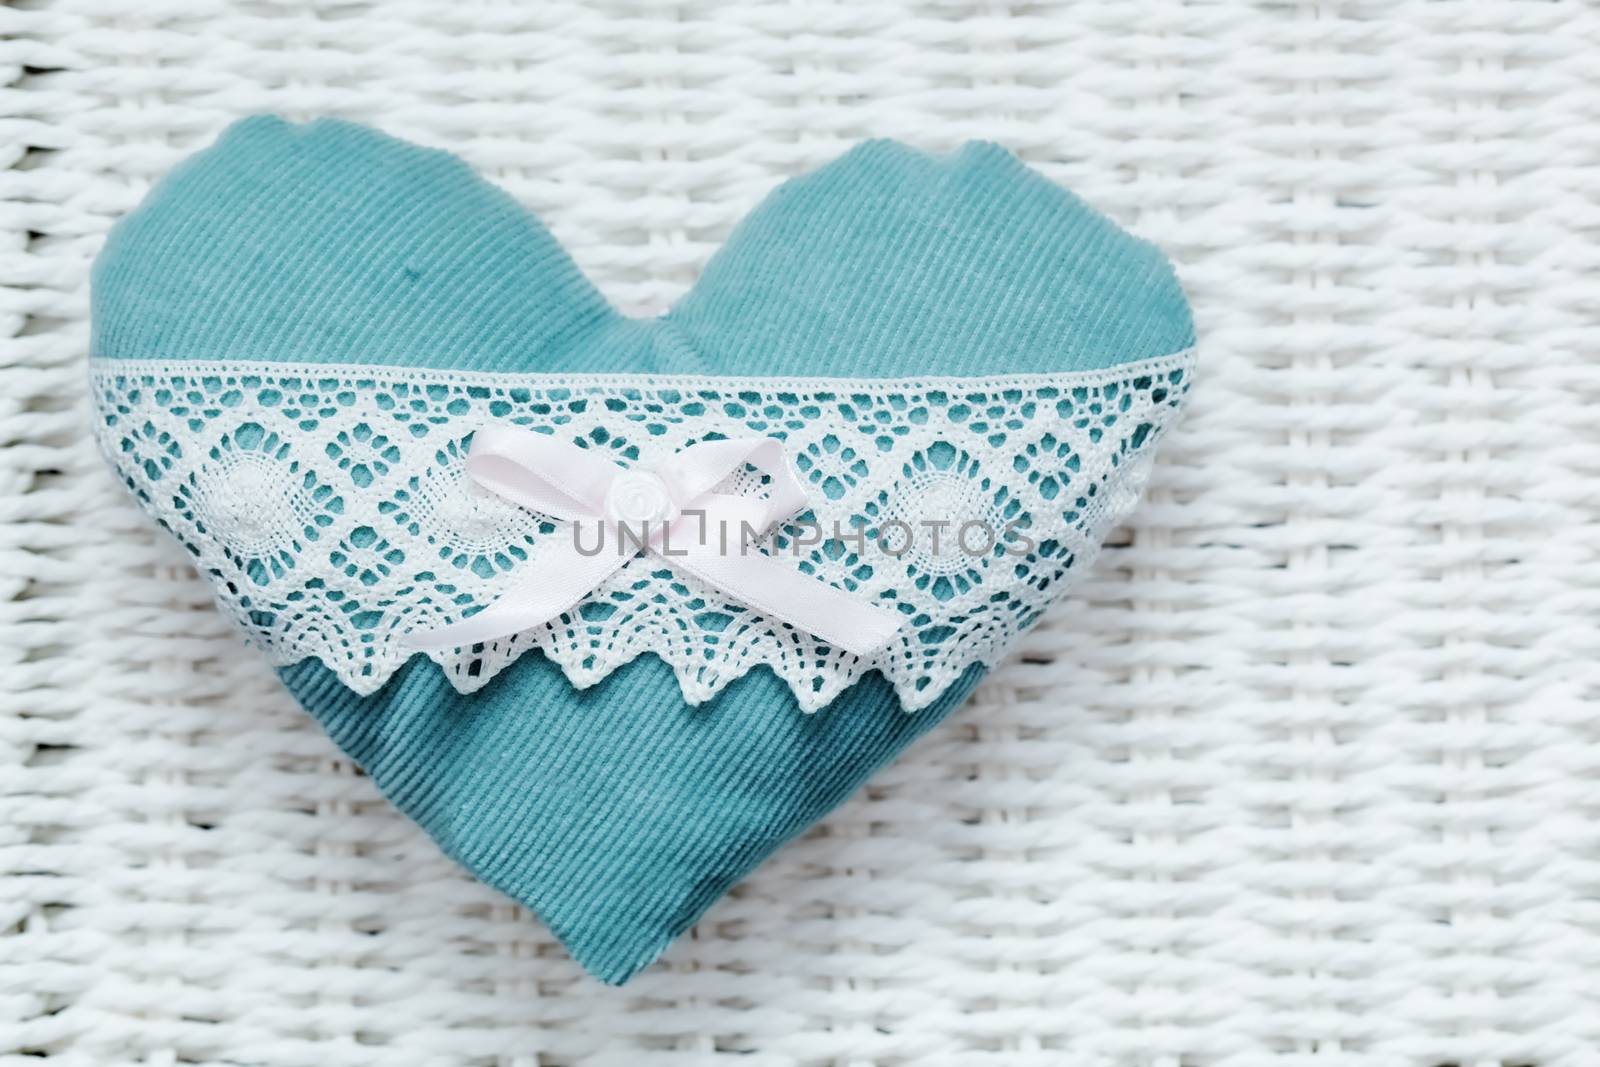 Vintage handmade plush turquoise heart on white rustic wicker. Romantic love, Valentine's Day concepts.